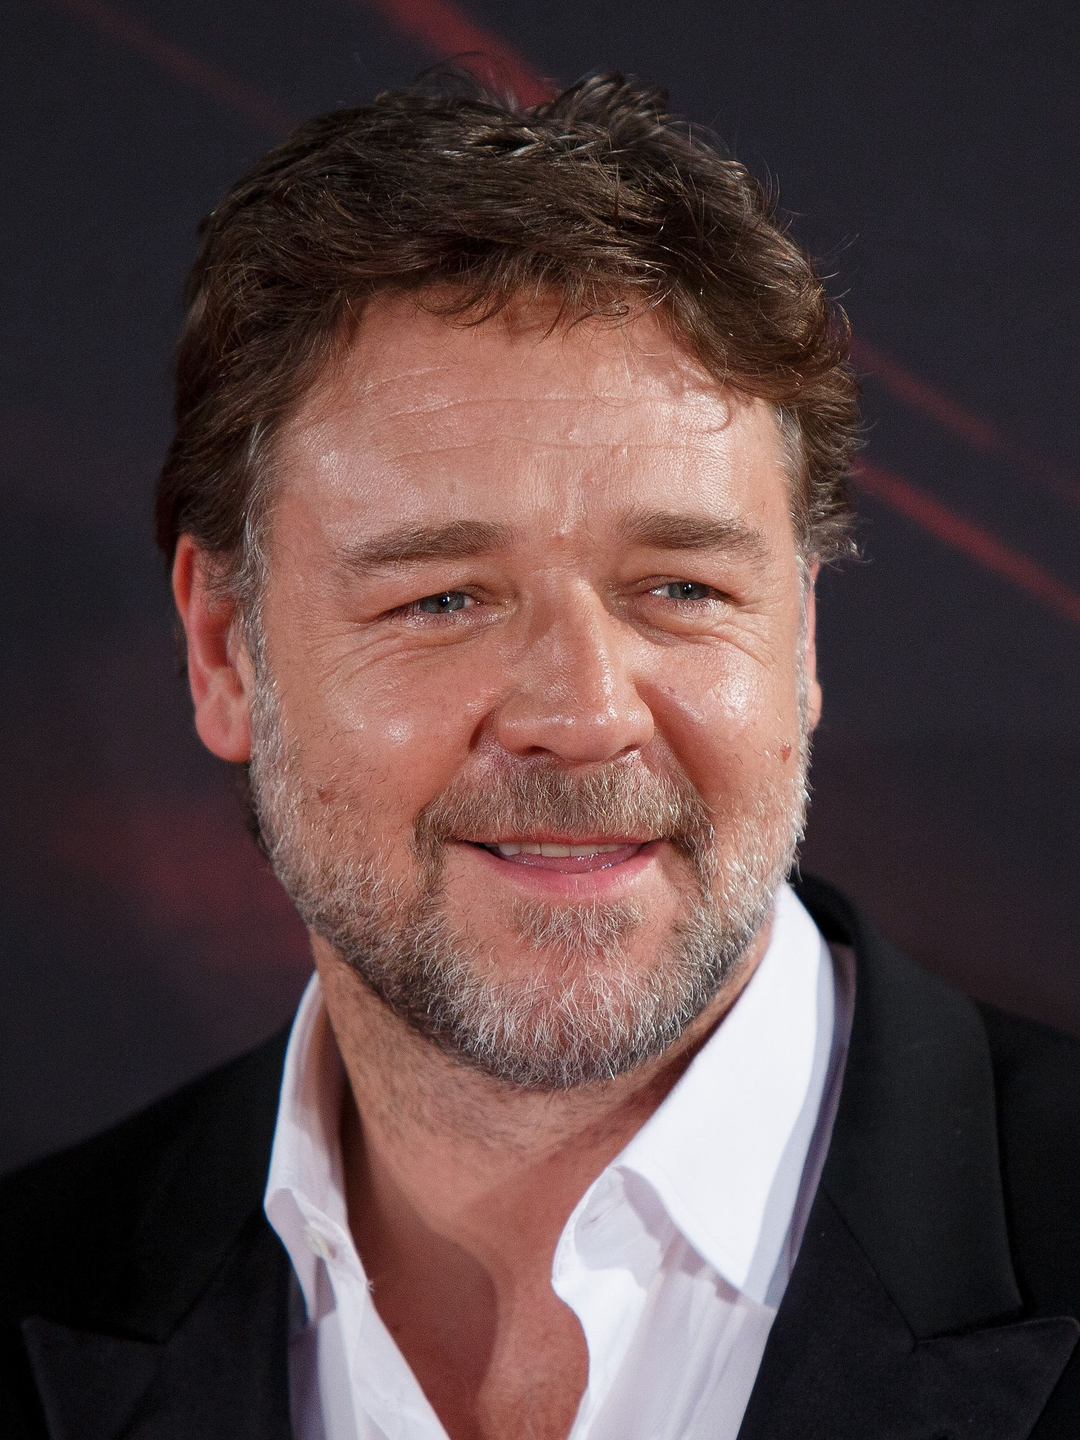 Russell Crowe his zodiac sign